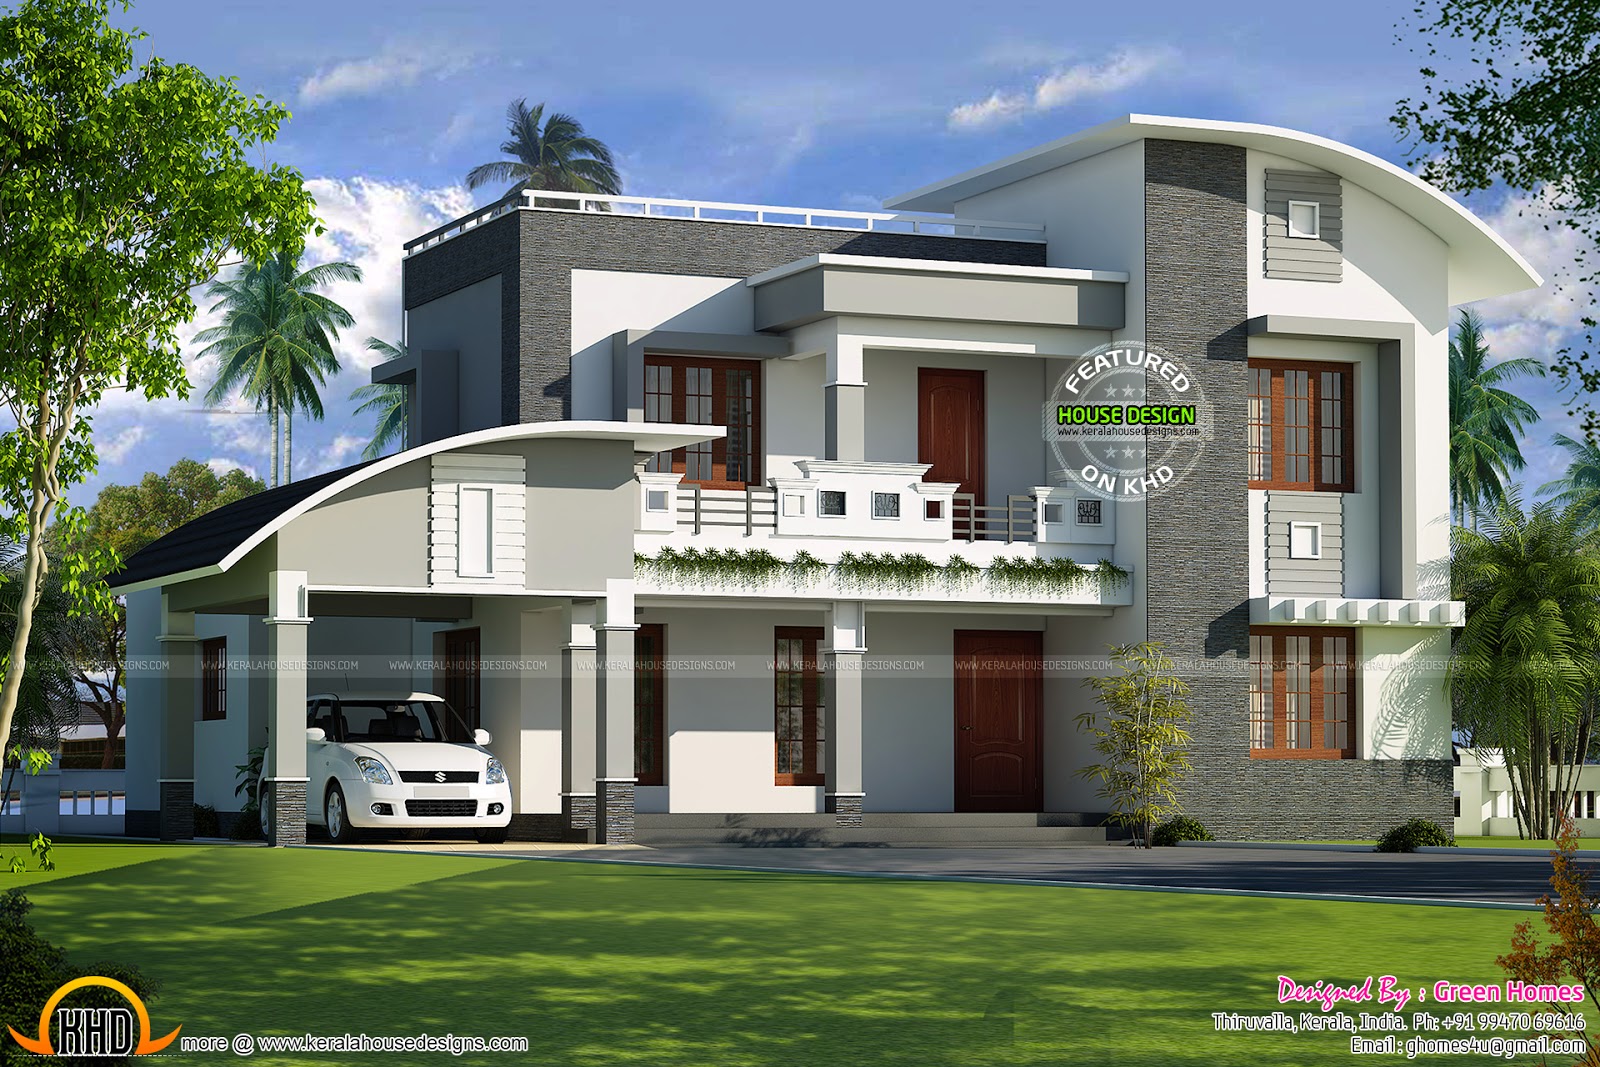  Curved  roof  flat roof  house  plan  Kerala home  design  and 